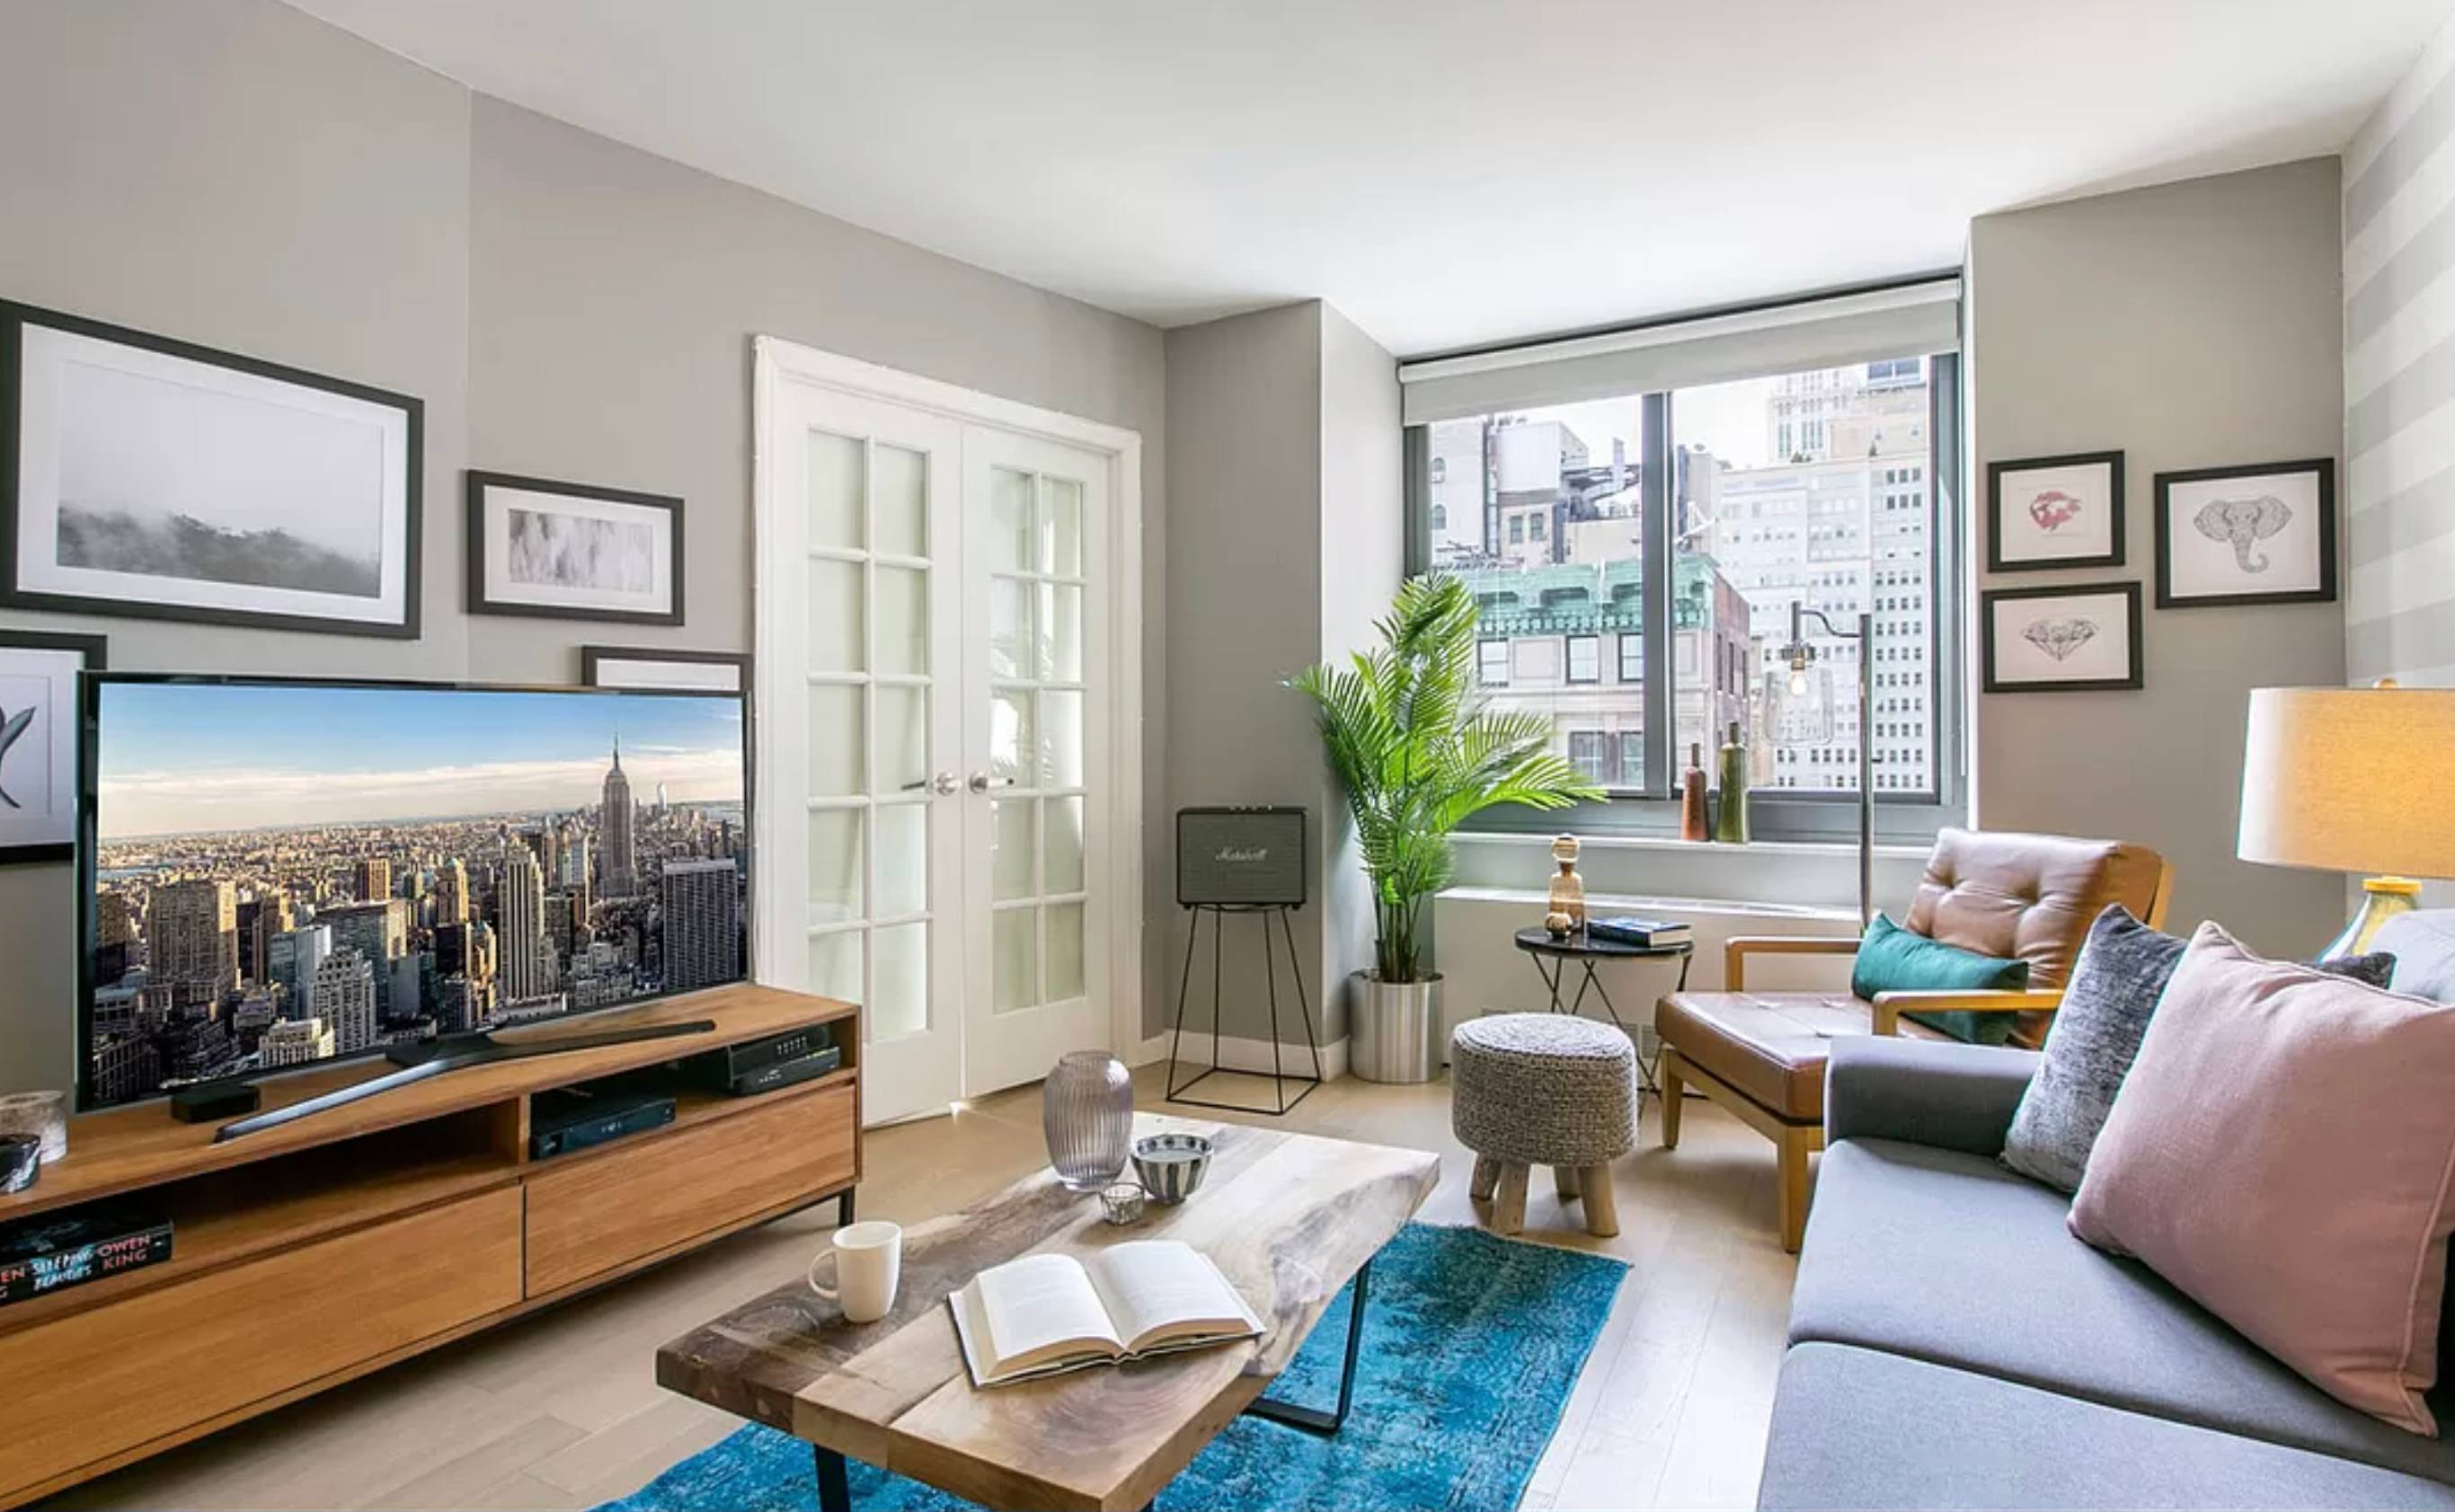 Short to long term 2 bed and 1.5 bath furnished apartment in the vibrant neighborhood of Tribeca